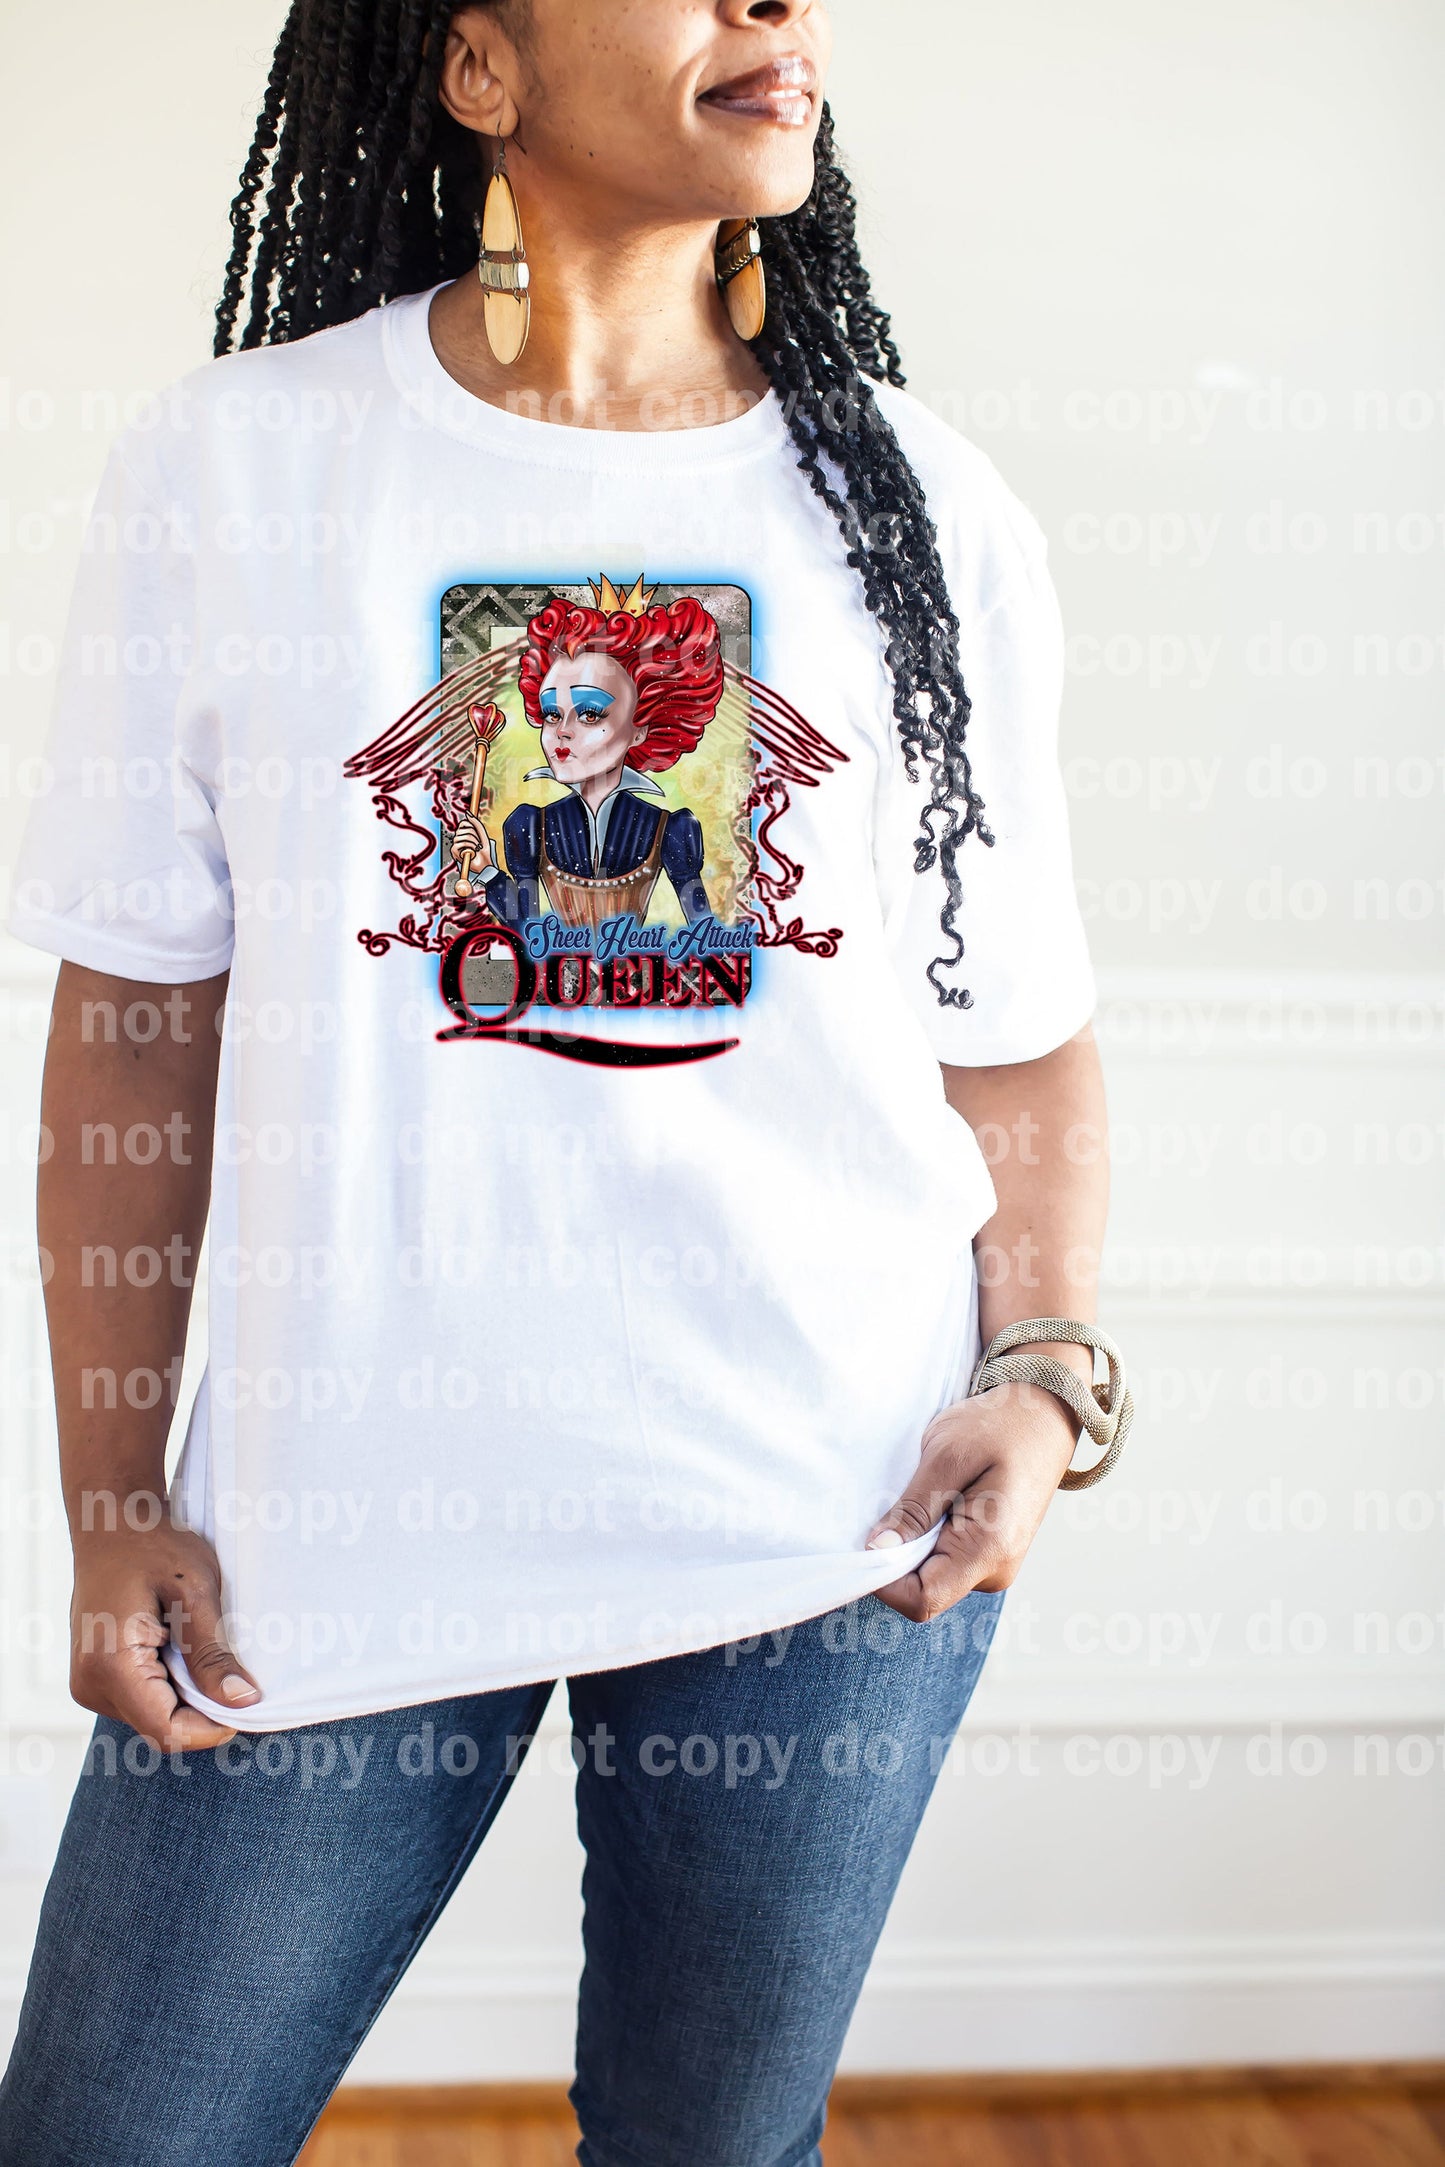 Queen Sheer Heart Attack Dream Print or Sublimation Print